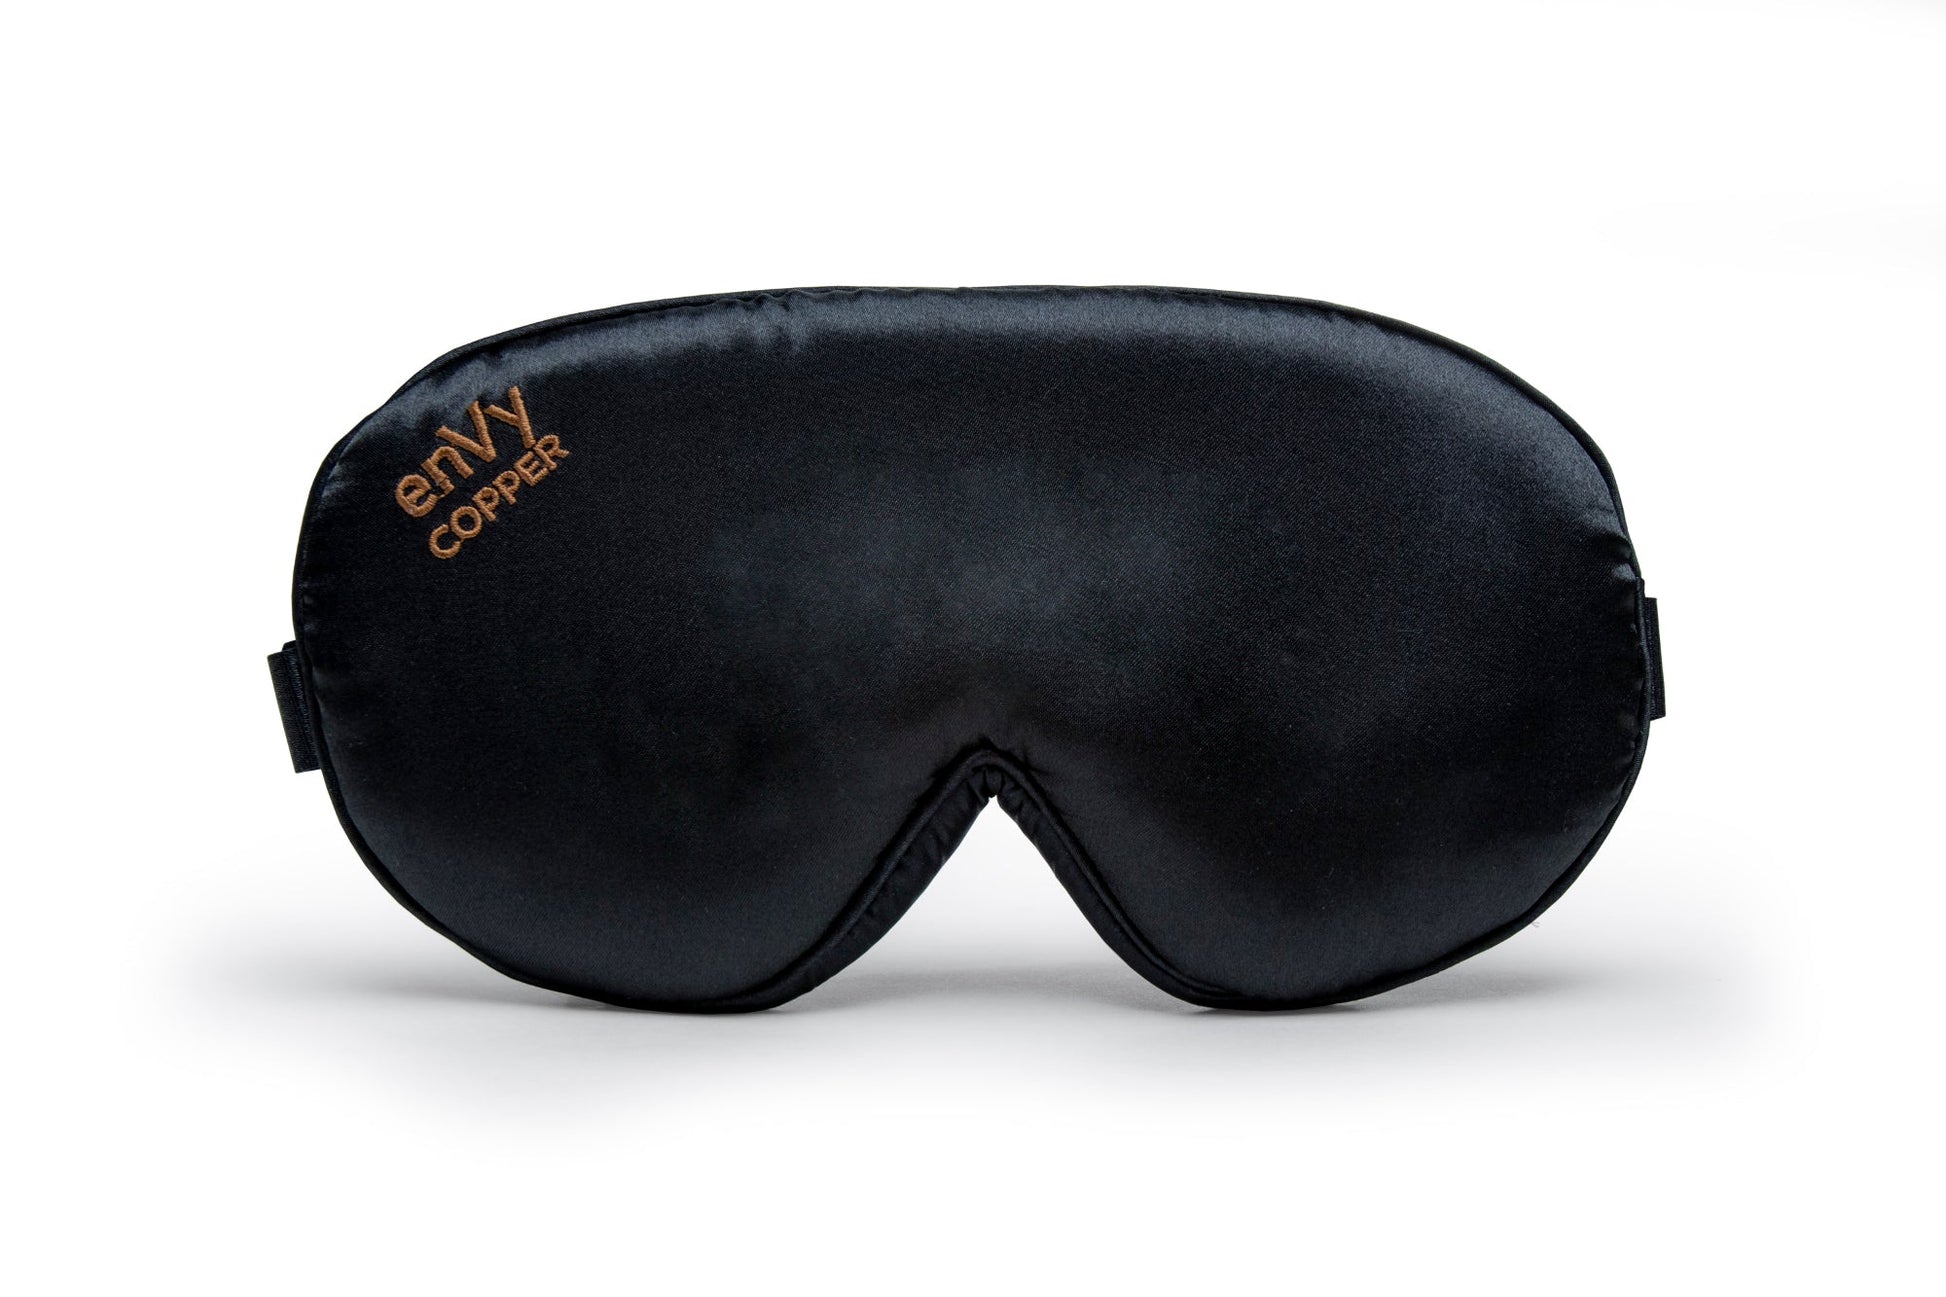 Sleep Clean with the Epic COPPER infused Silk Sleep Eye Mask by enVy – enVy  Pillow Canada